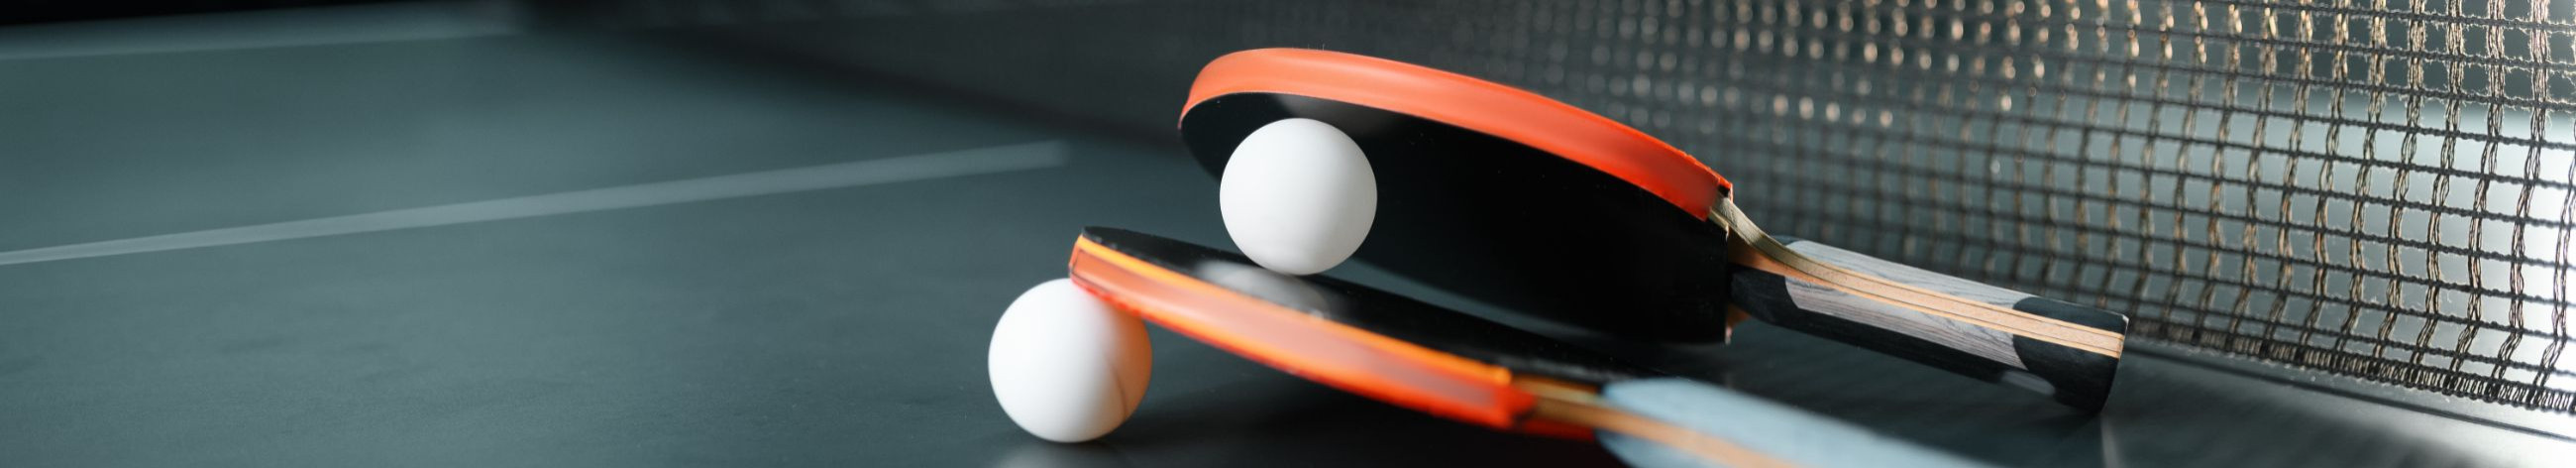 table tennis equipment, balls, clothes, sports bags, rackets, competition equipment, ping pong balls, table tennis clothing, sports bags for table tennis, table tennis rackets